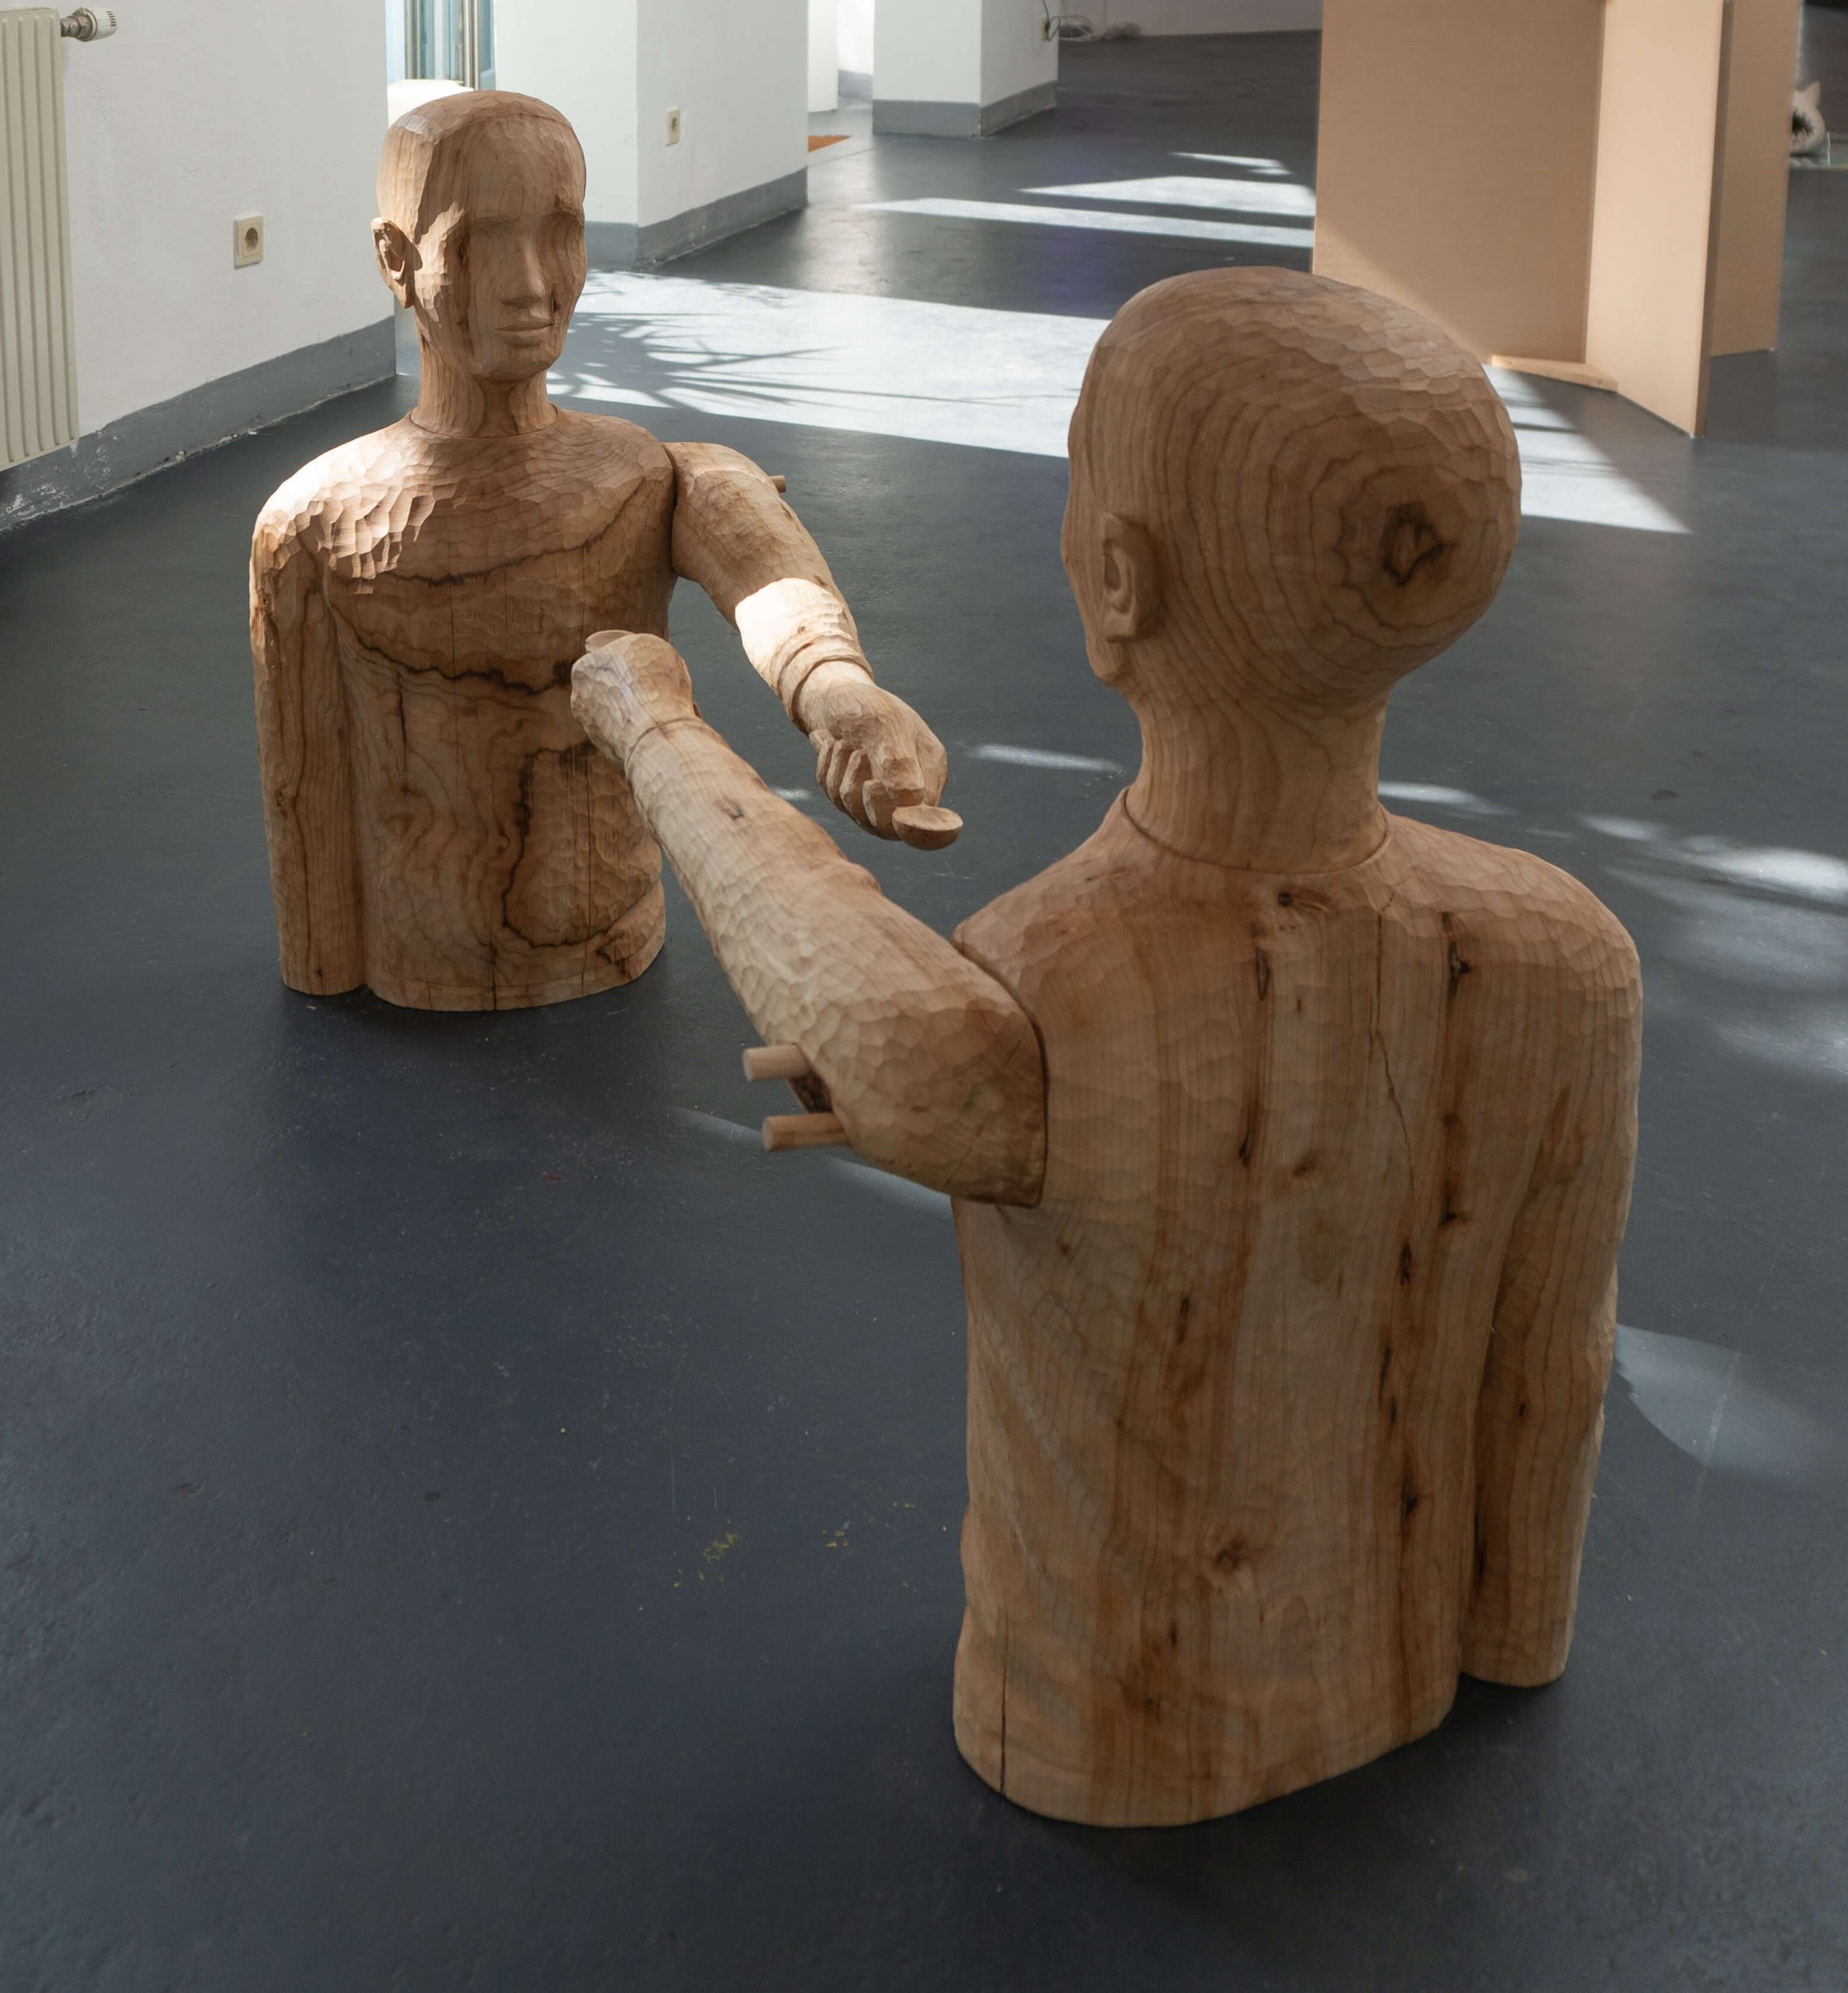 Wooden sculpture of two bodies holding a spoon.